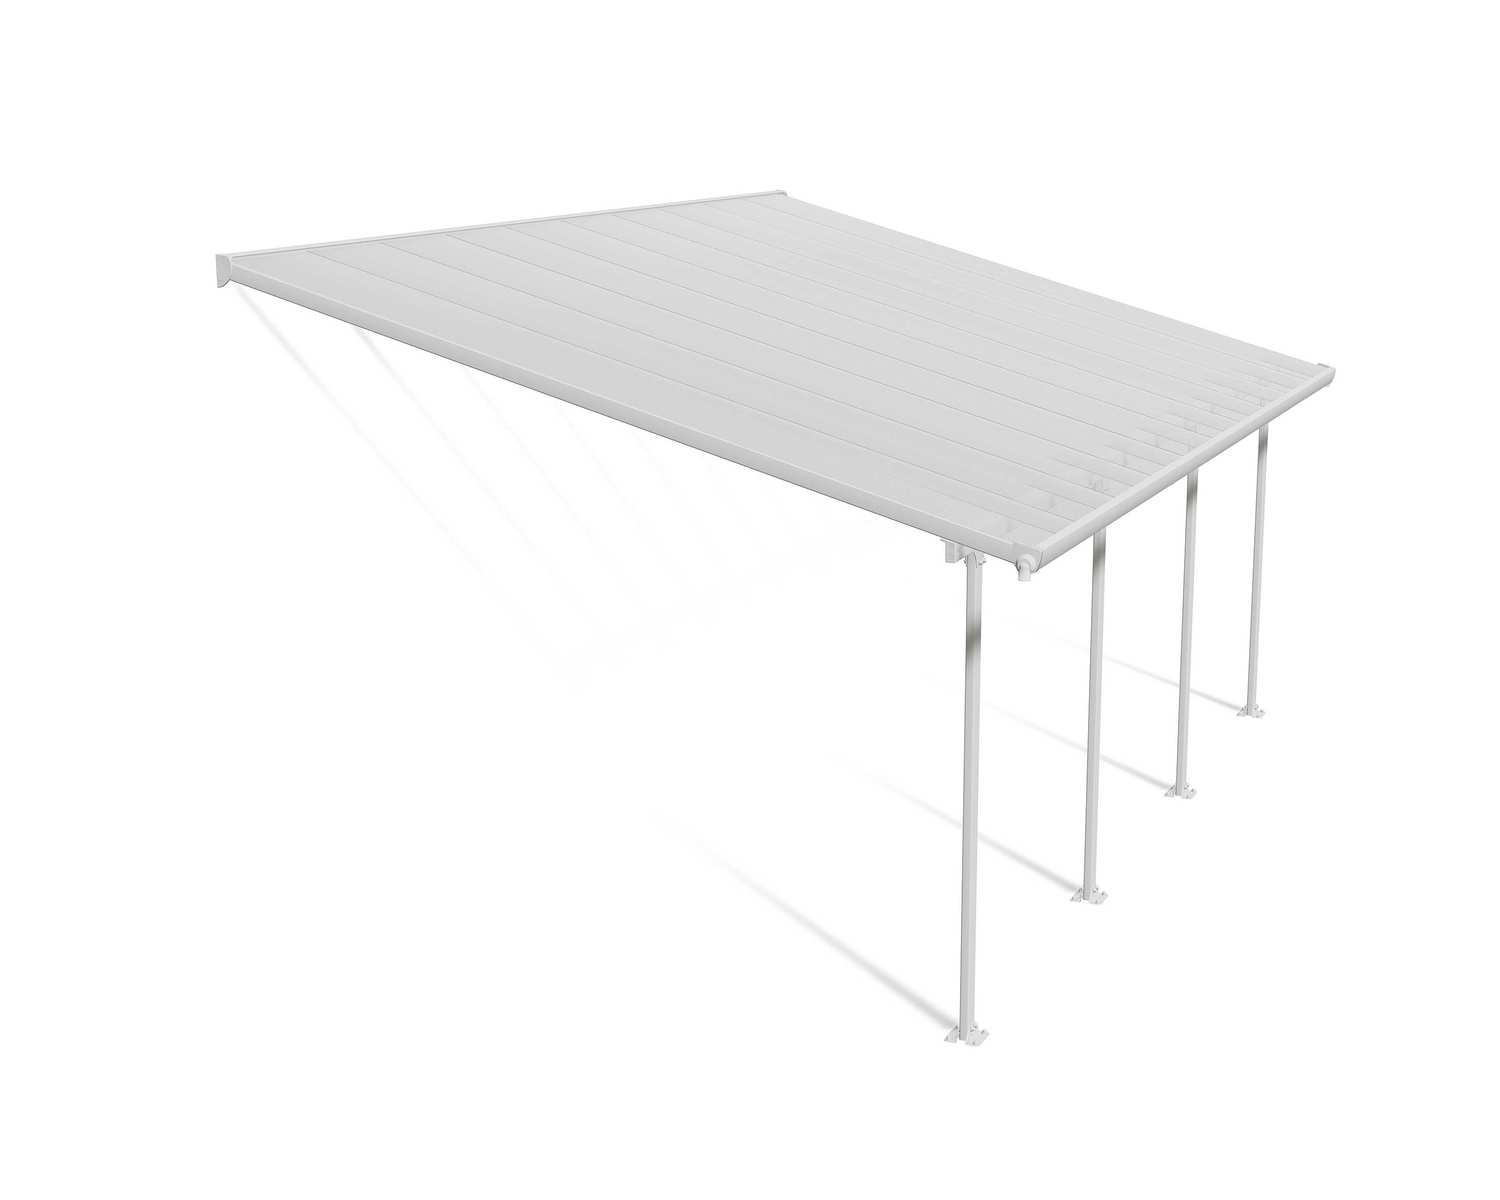 Feria 13 ft. x 20 ft. White Aluminium Patio Cover With 4 Posts, Clear Twin-Wall Polycarbonate Roof Panels.